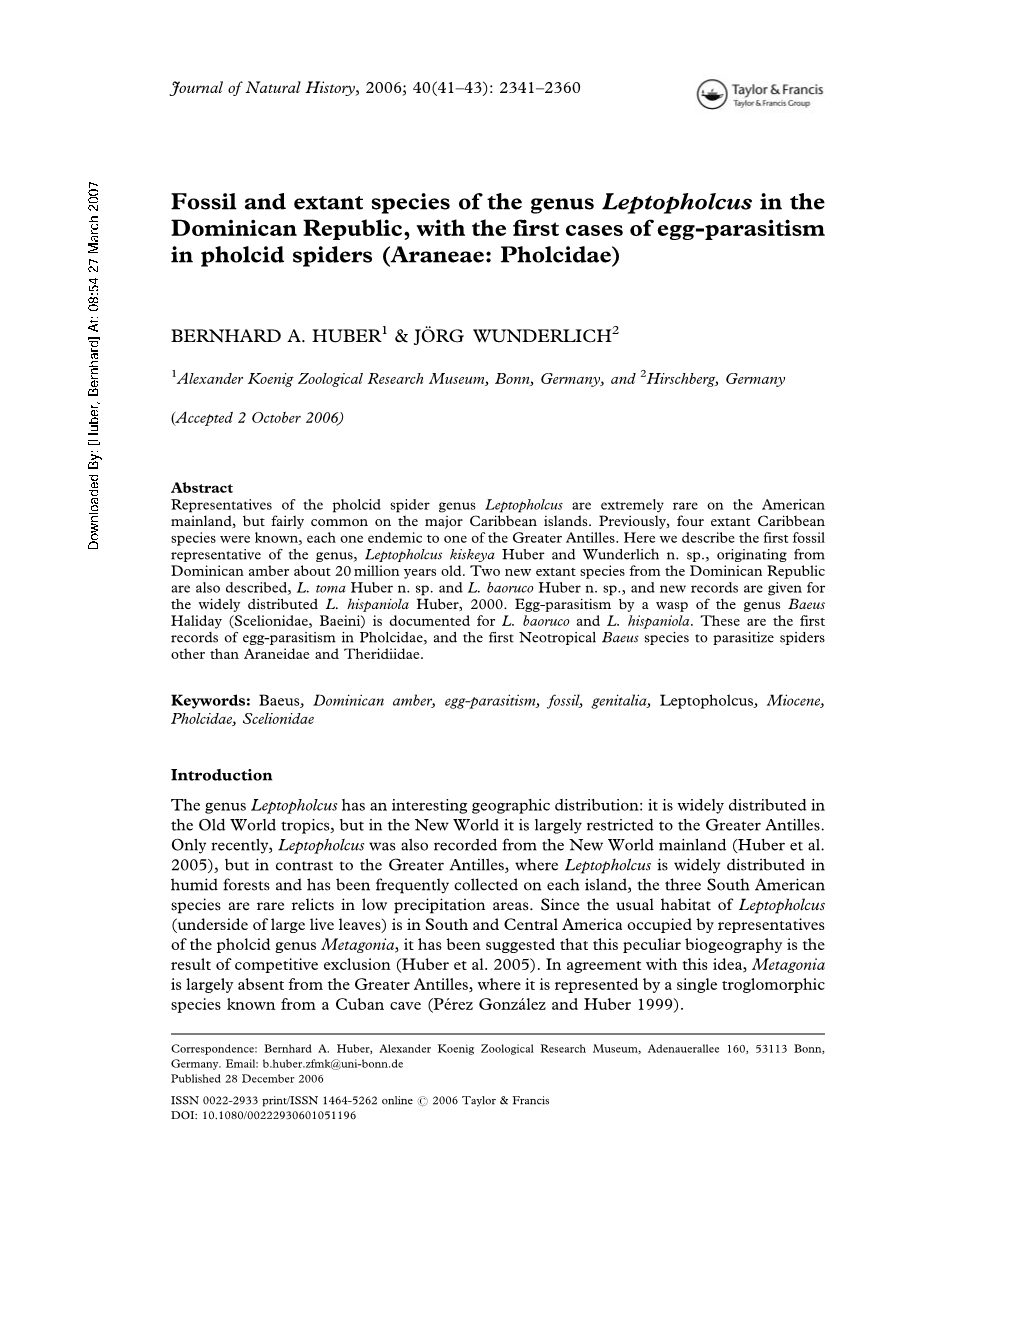 Fossil and Extant Species of the Genus Leptopholcus in the Dominican